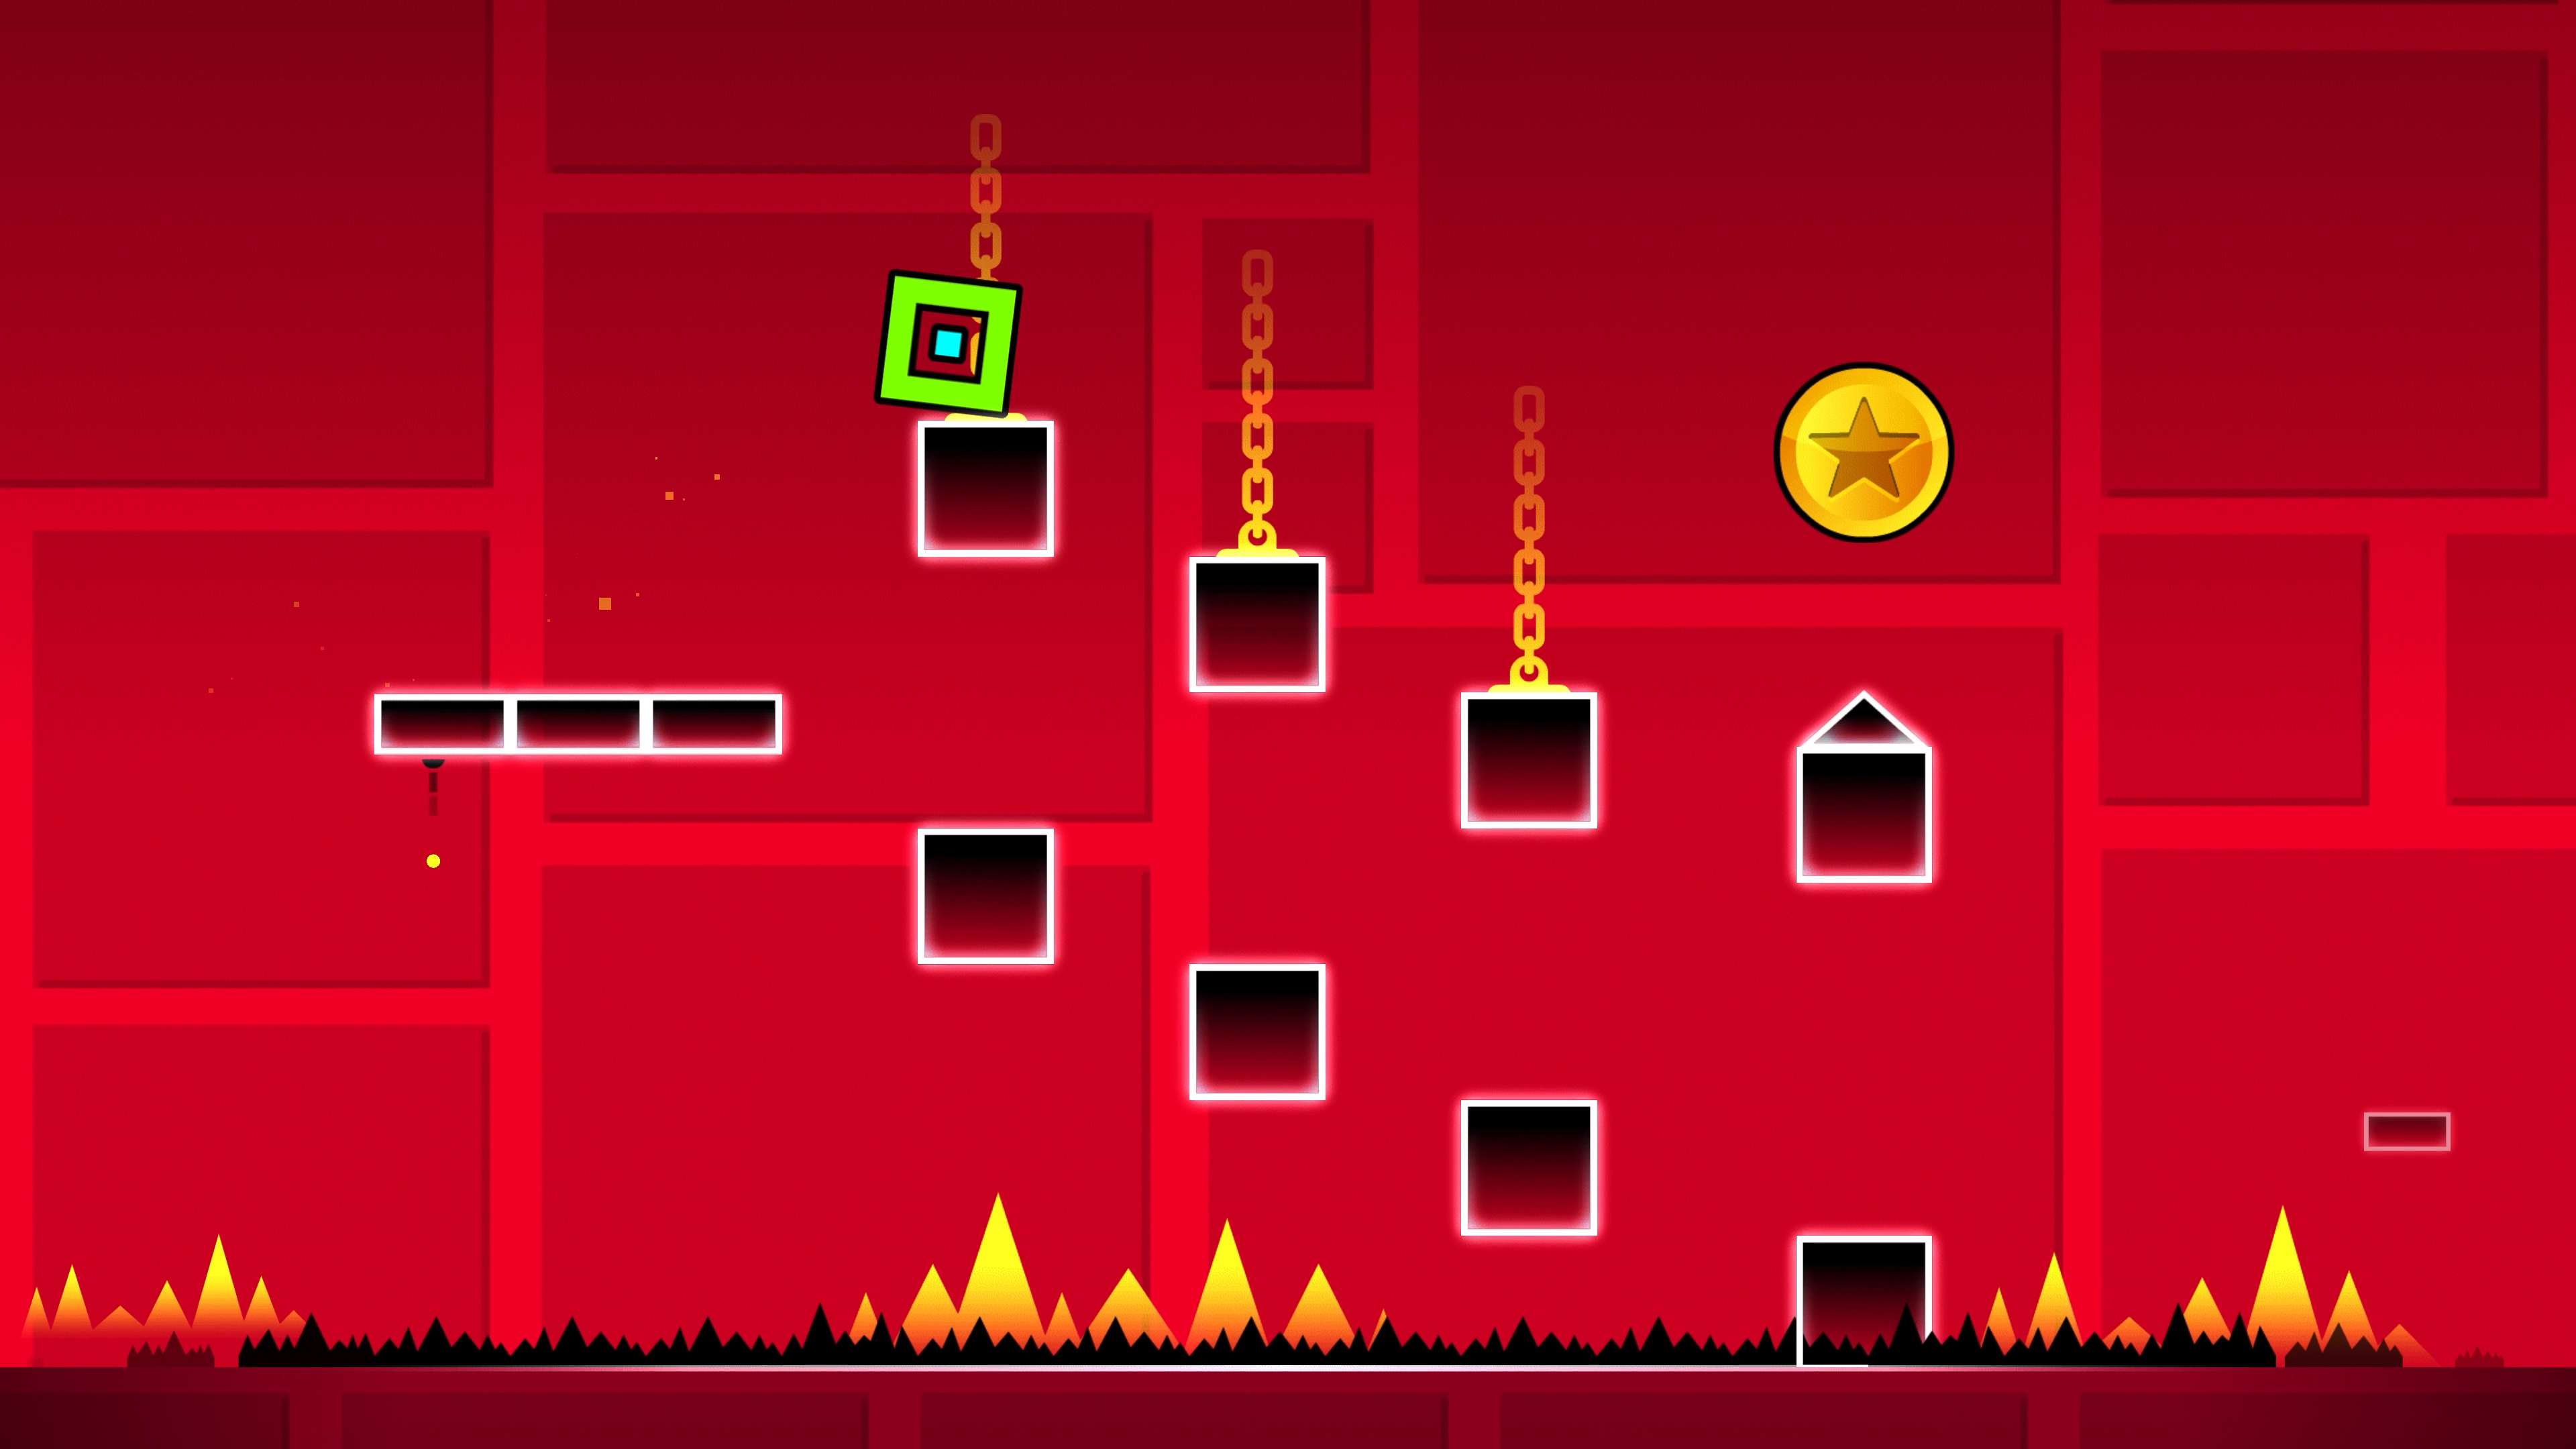 geometry dash stereo madness